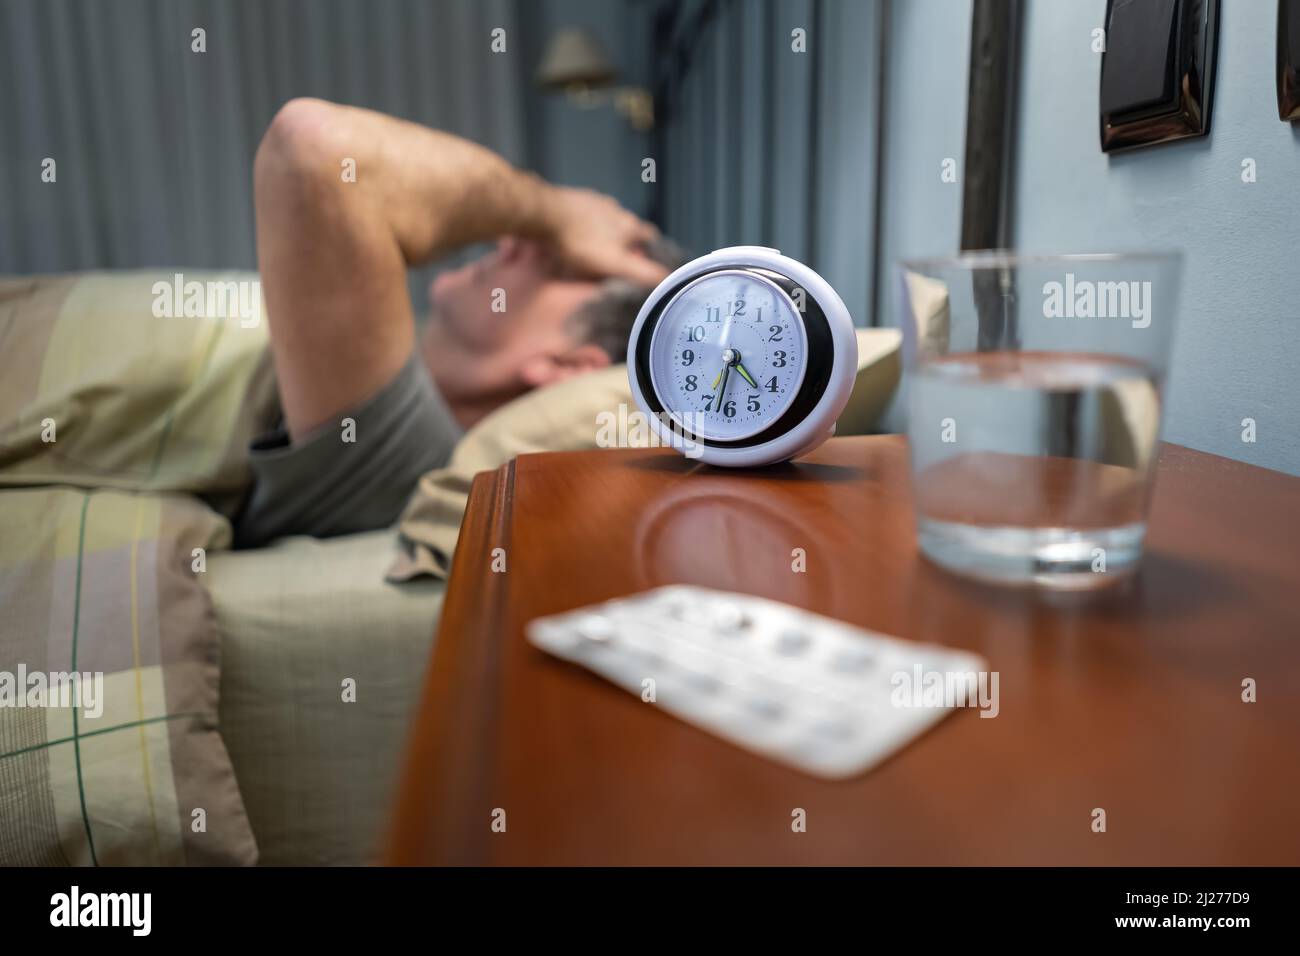 Man with insomnia lying down with alarm clock and sleeping pills Stock Photo